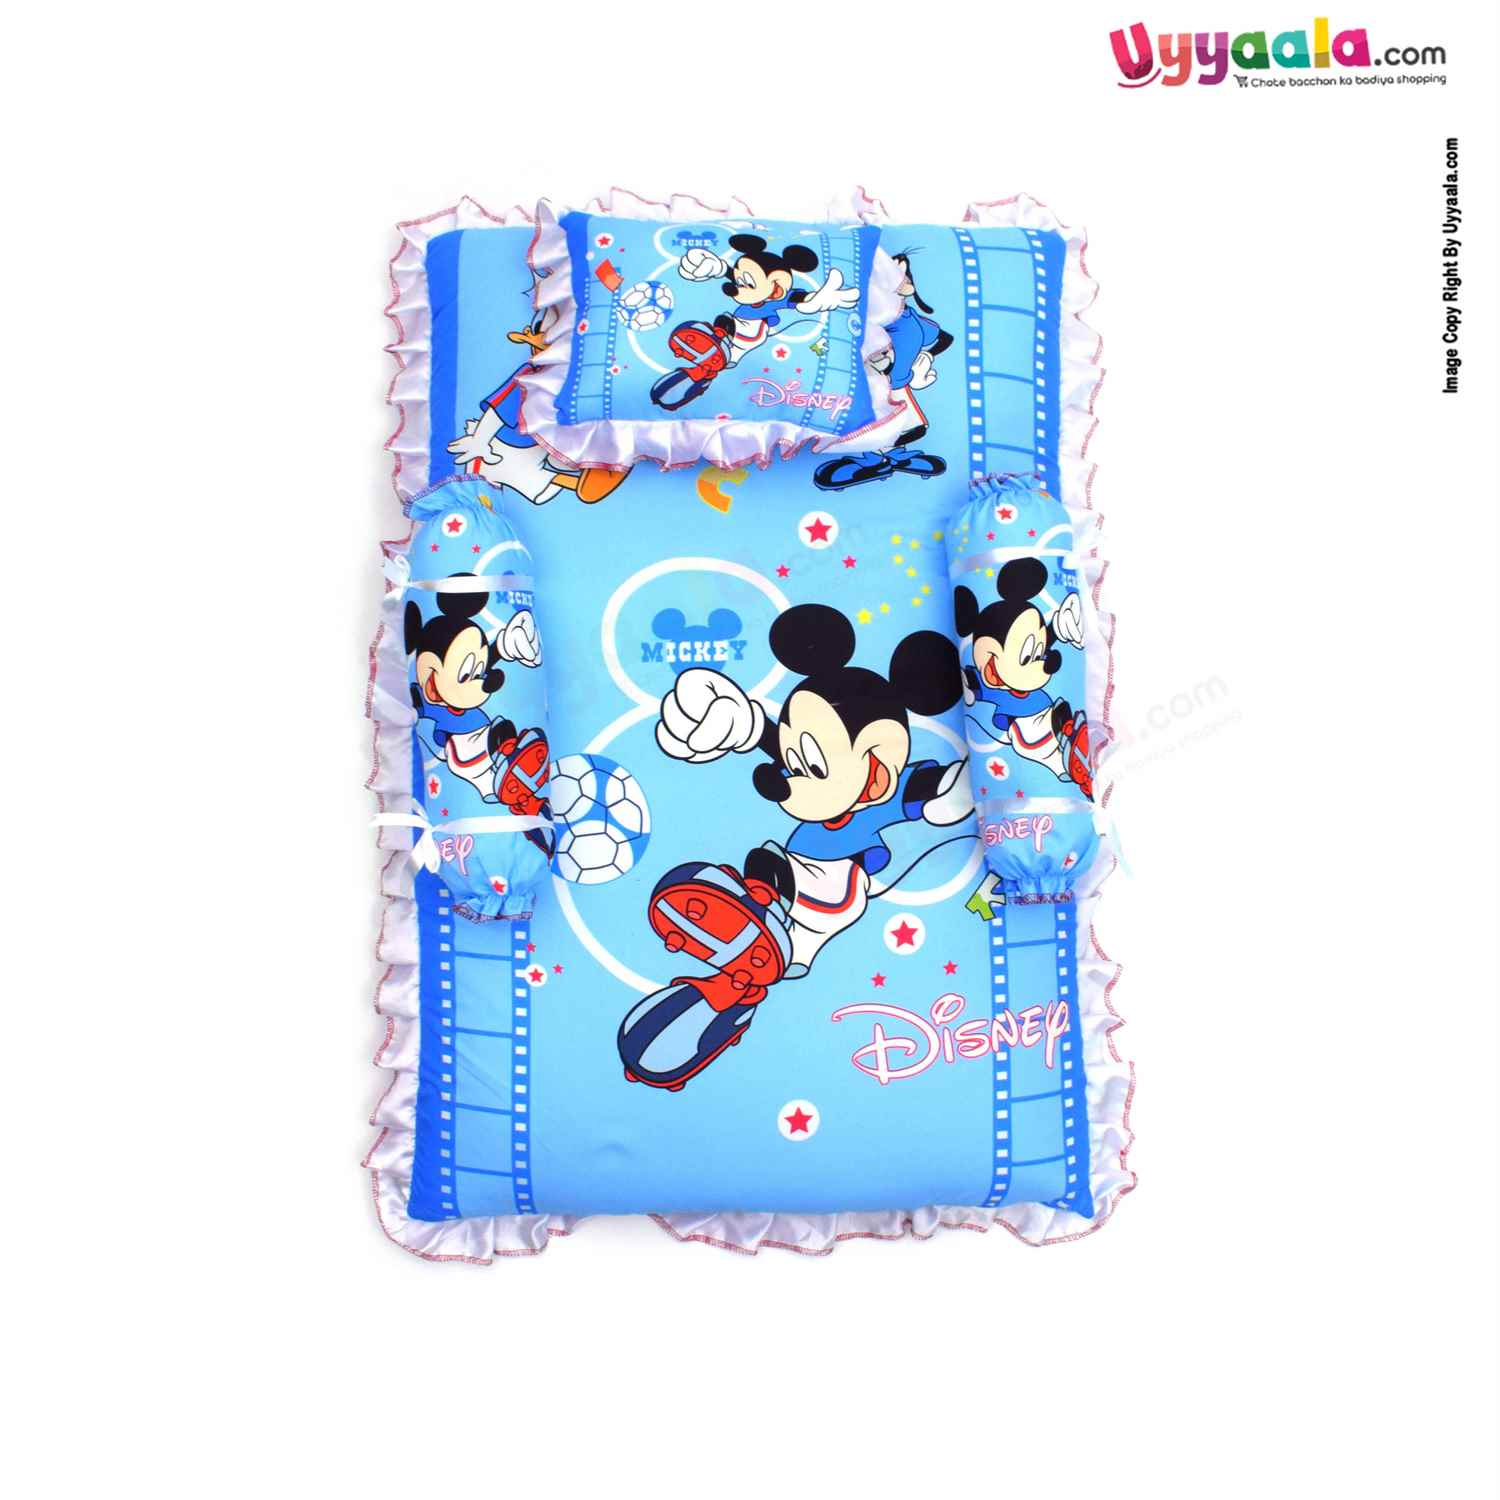 DISNEY Baby Bedding Set of 4 with Bolster and Pillow Cotton, Mickey & Duck Print 0+m Age, Blue